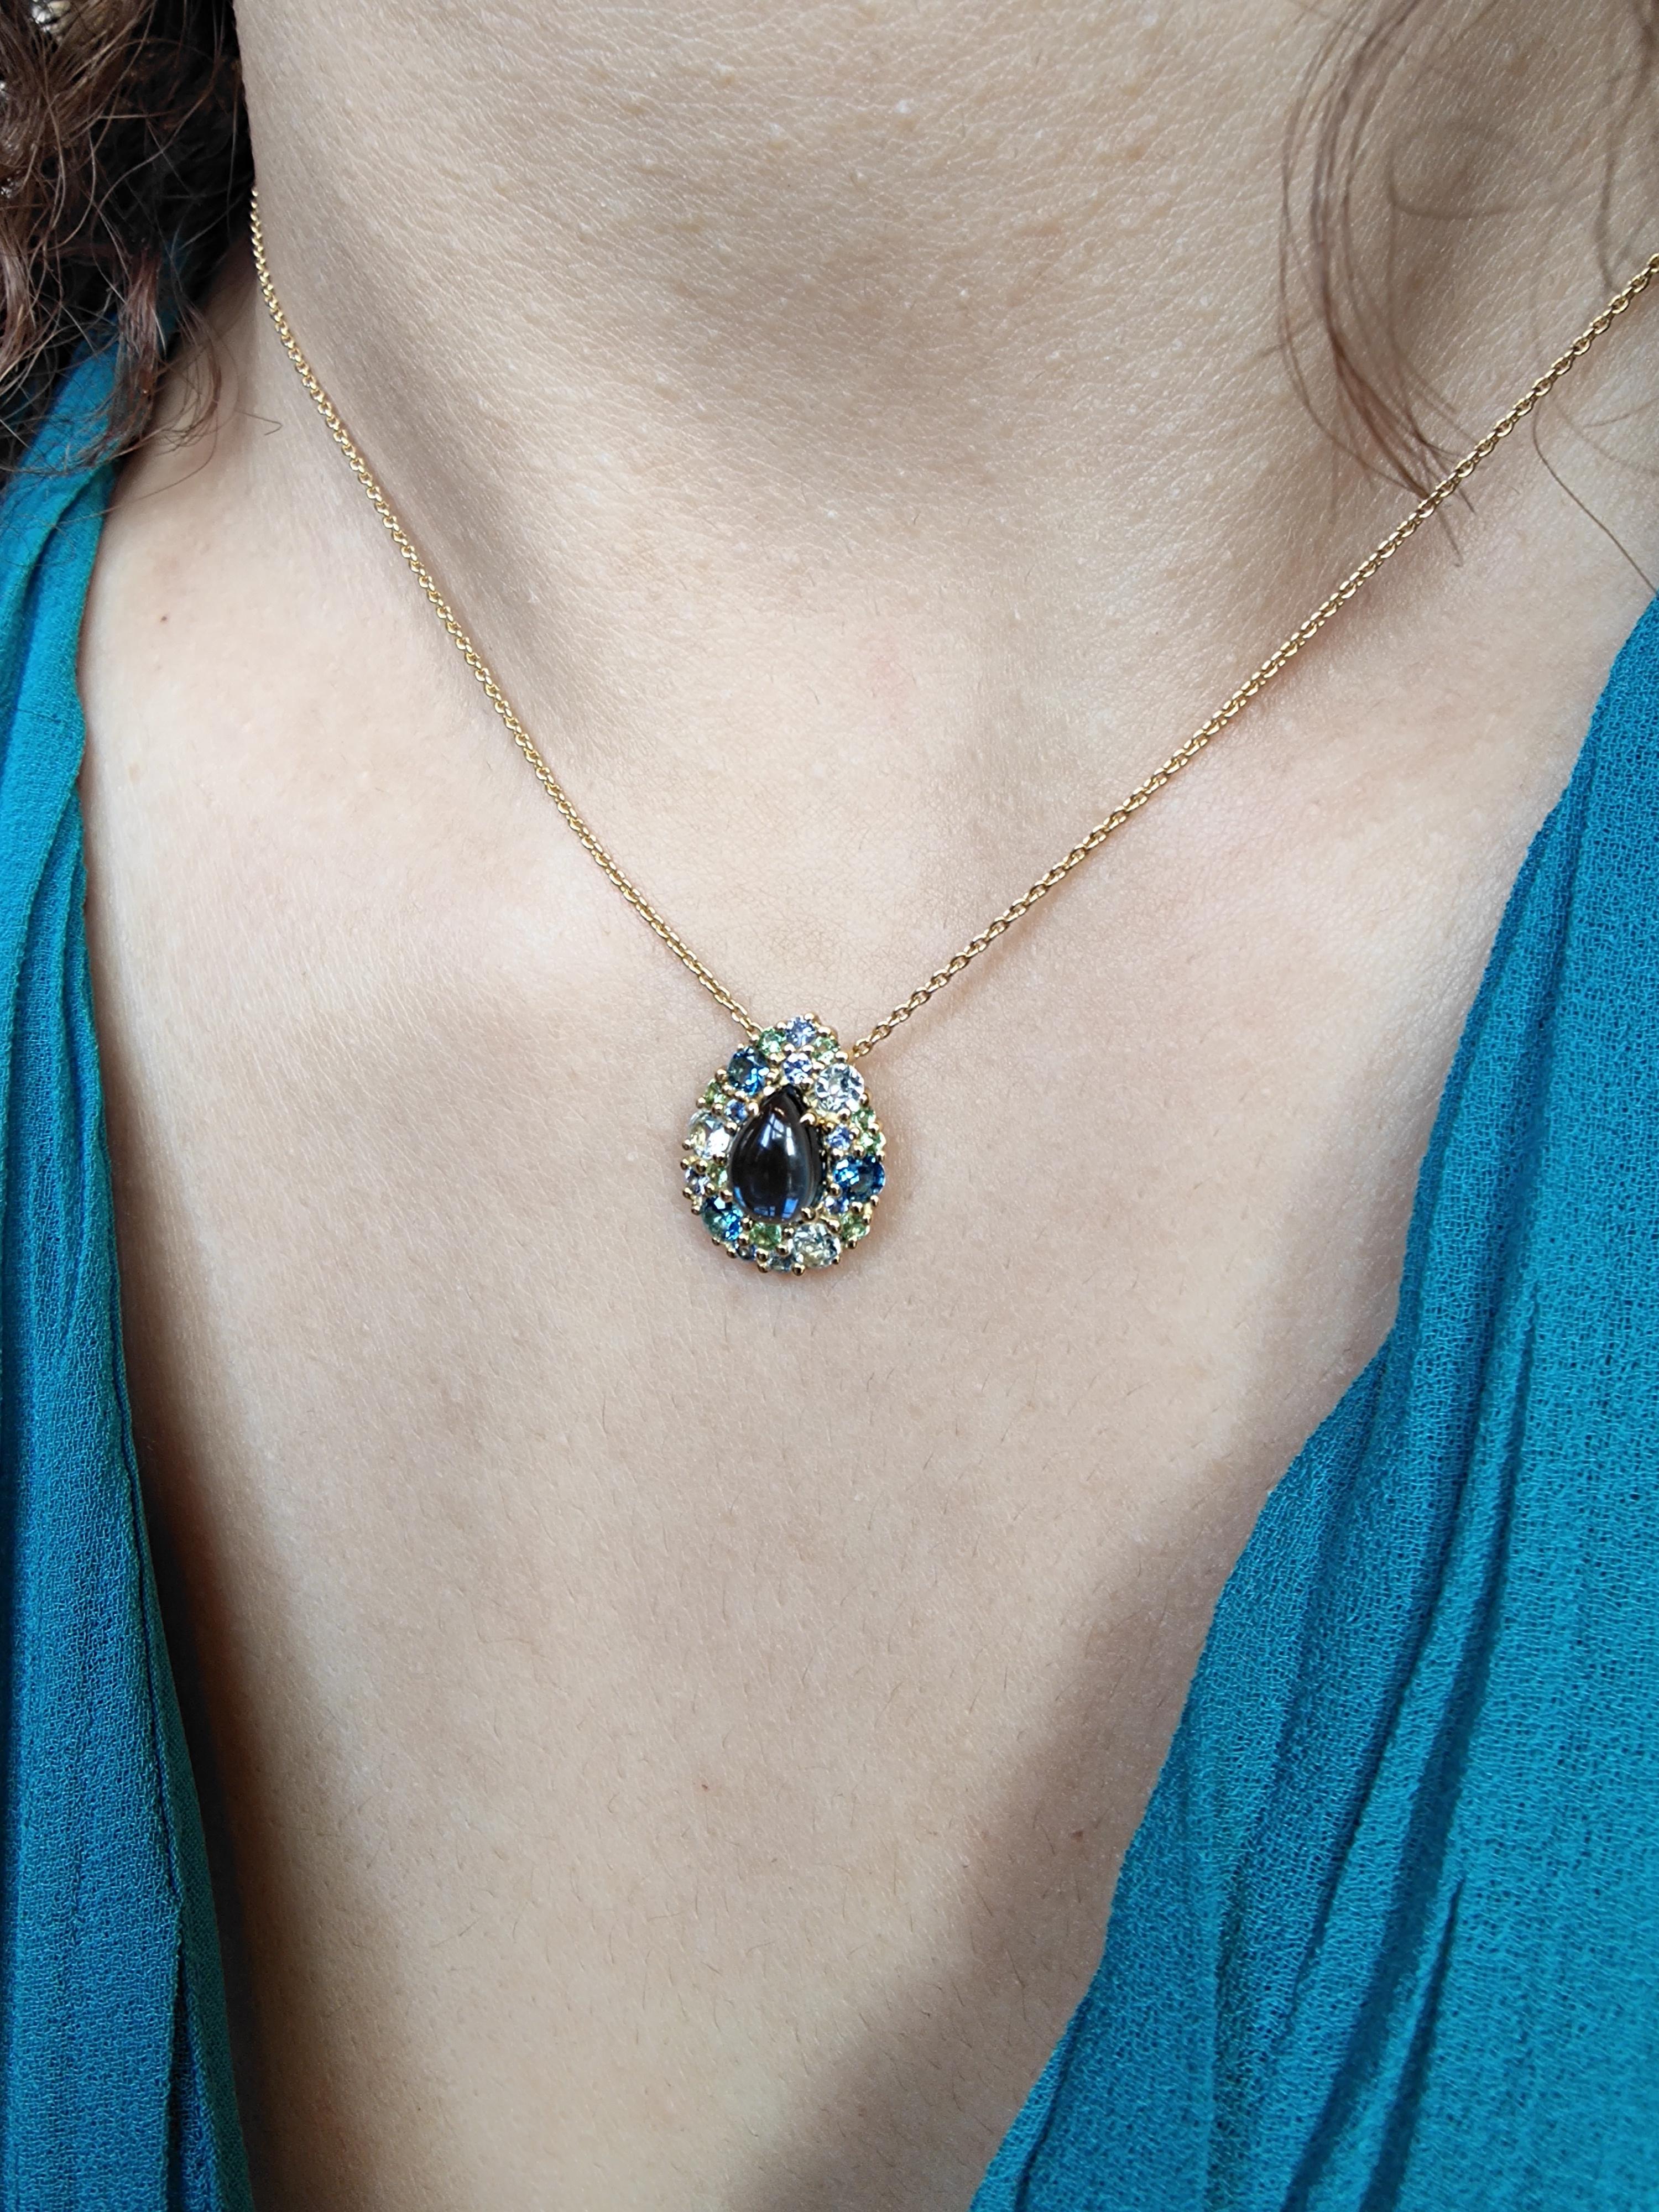 This beautiful, classic pendant is made using solid 18 karat yellow gold and a gorgeous pear shaped cabochon cut London blue topaz. Around are set a mix of tsavorite, iolite, sapphire, a total amount of 2.31 carat of gemstones. The size of the